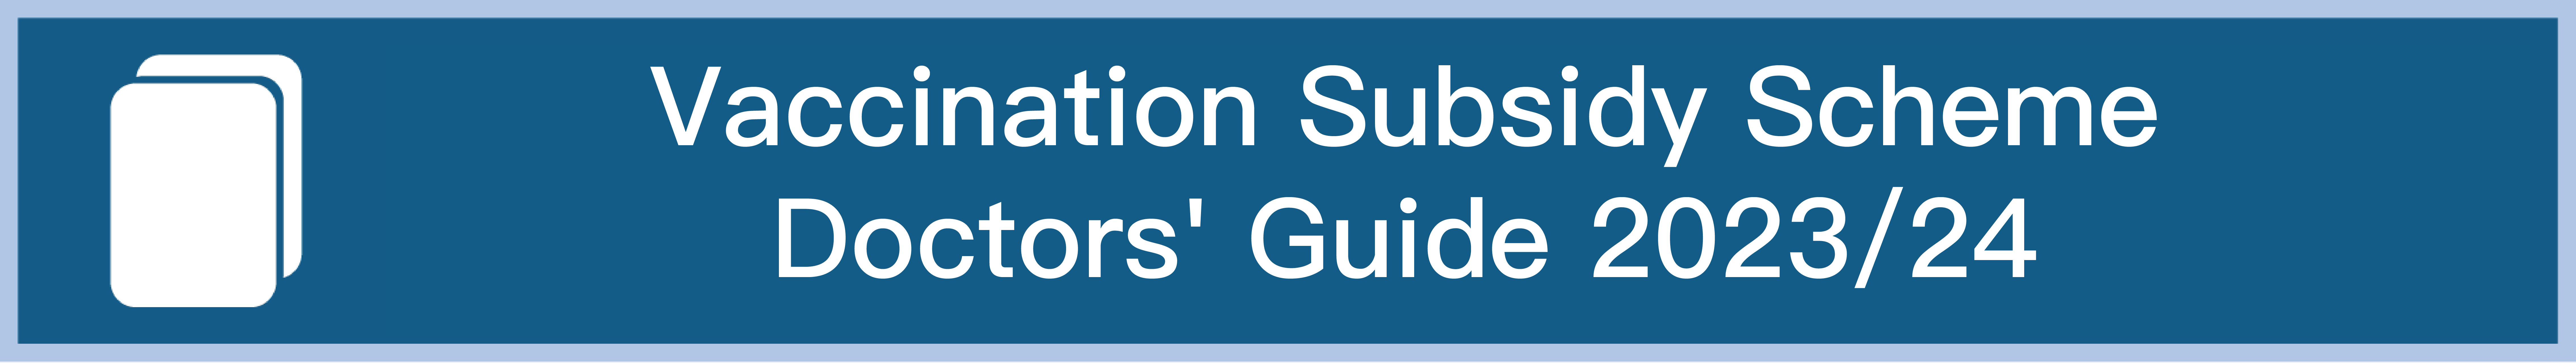 Vaccination Subsidy Scheme Doctors' Guide 2023/24